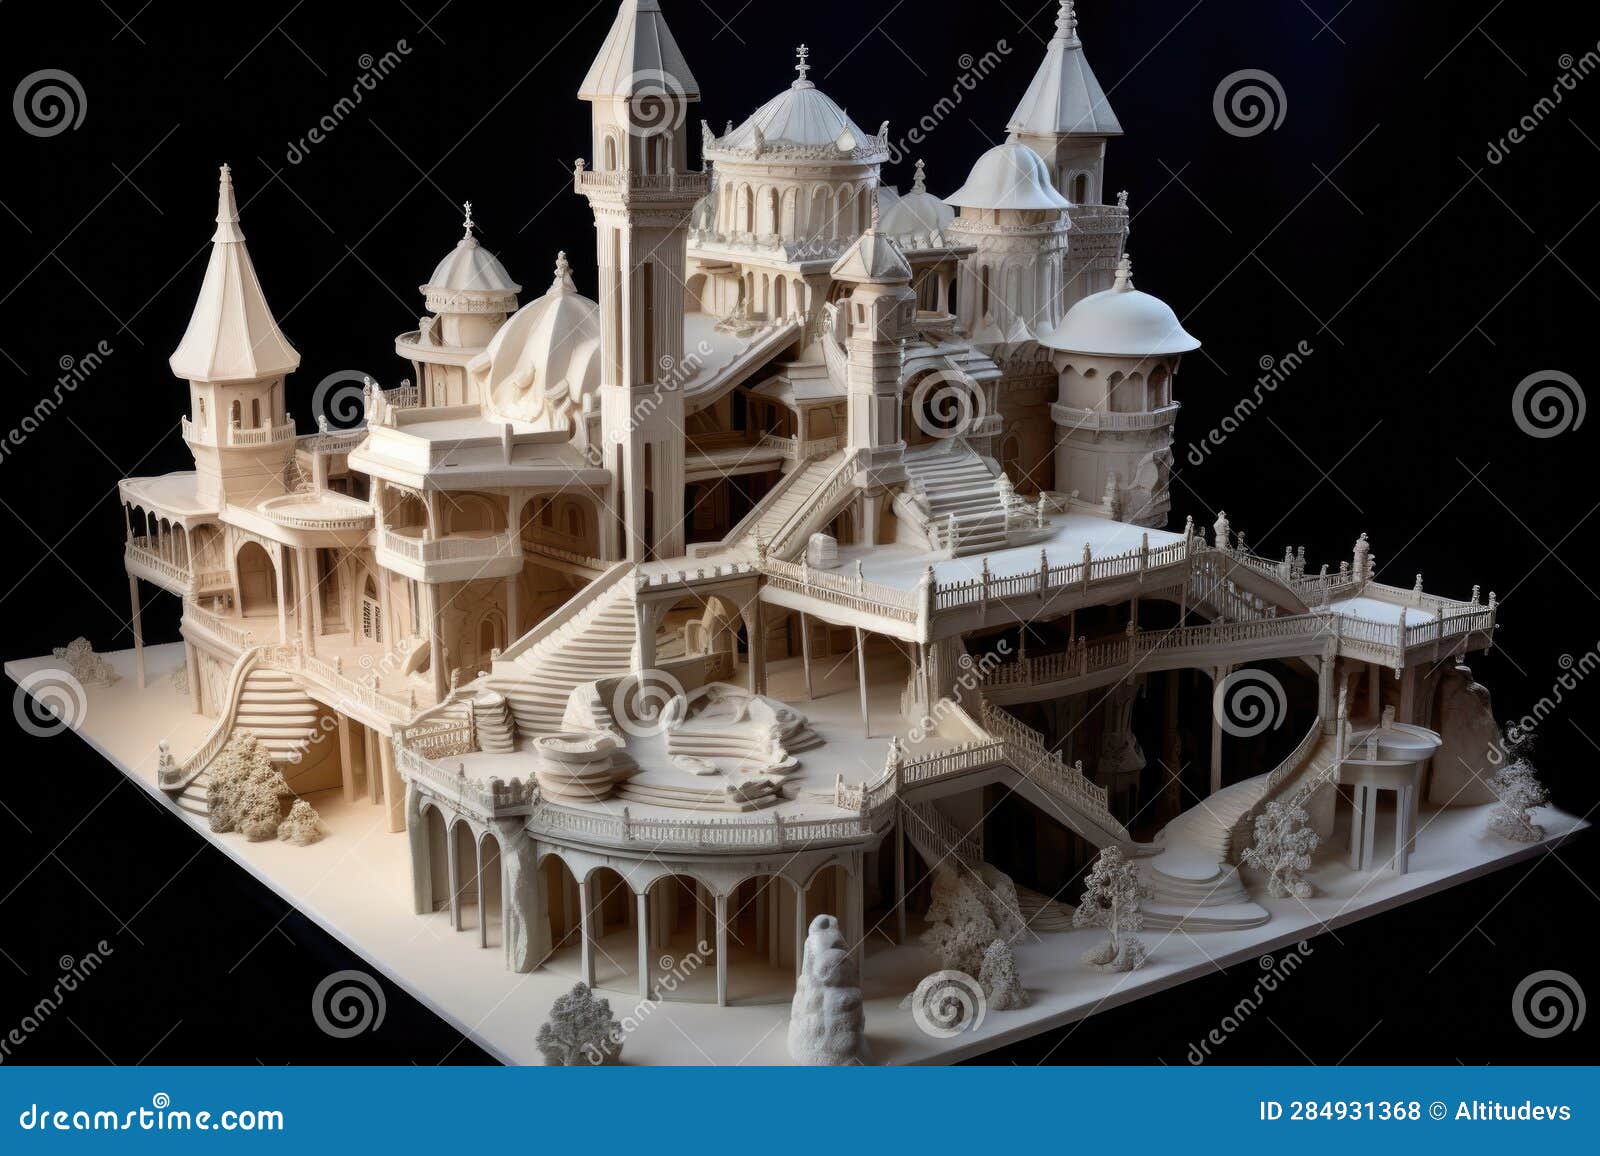 intricate 4d printed architectural model